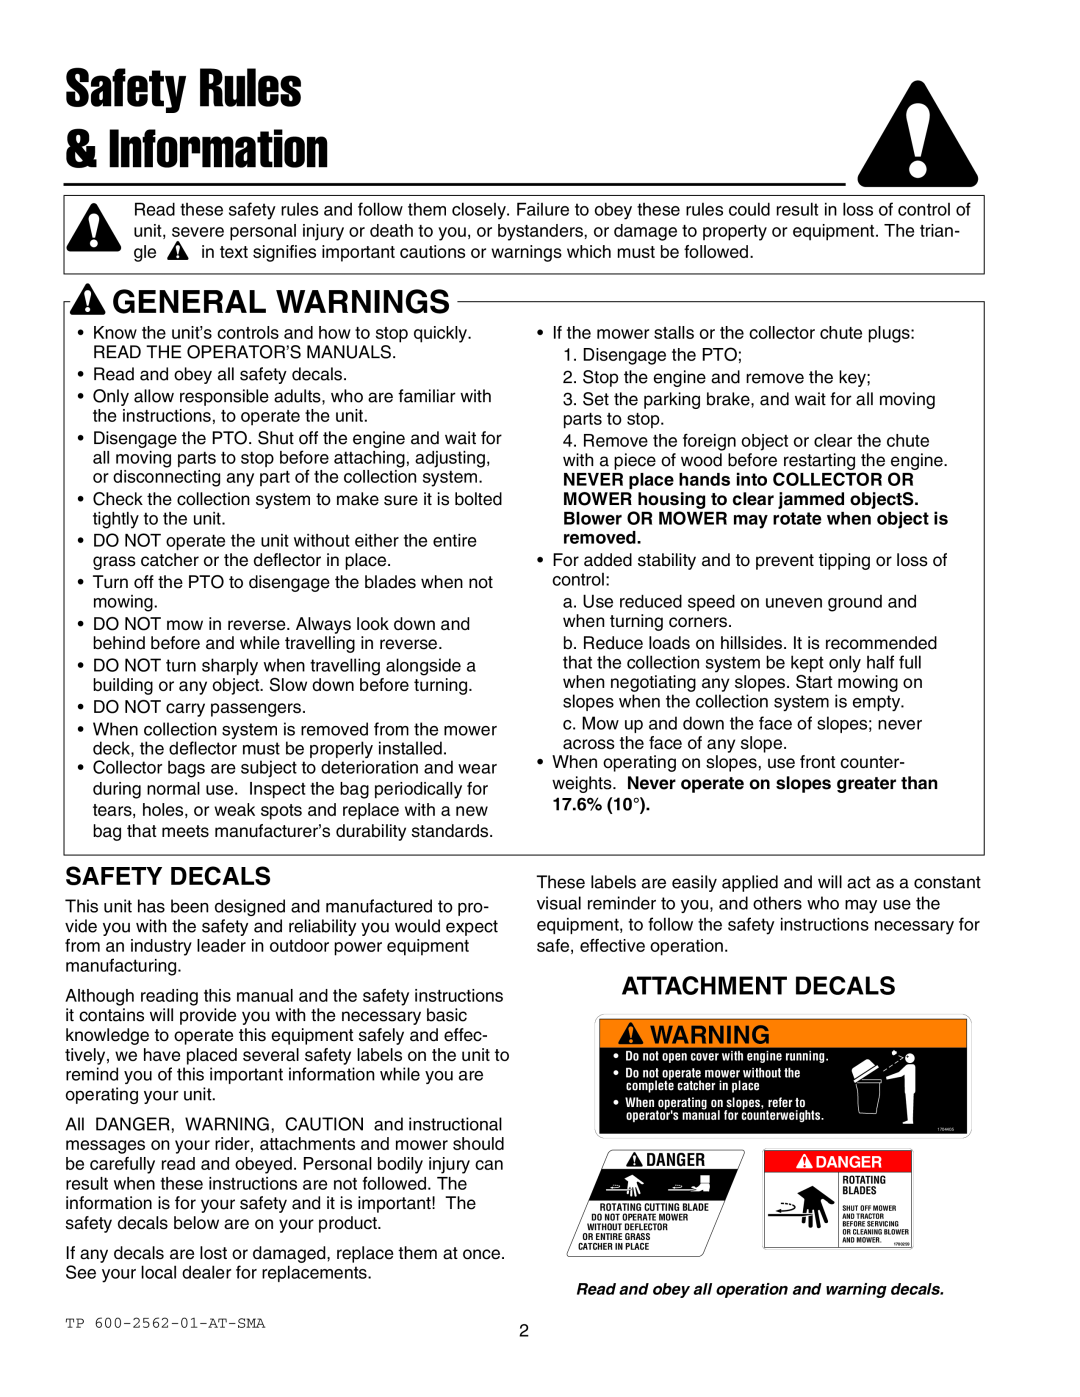 Simplicity 1692149, 1692150 instruction sheet Safety Rules Information, Safety Decals, Attachment Decals, General Warnings 